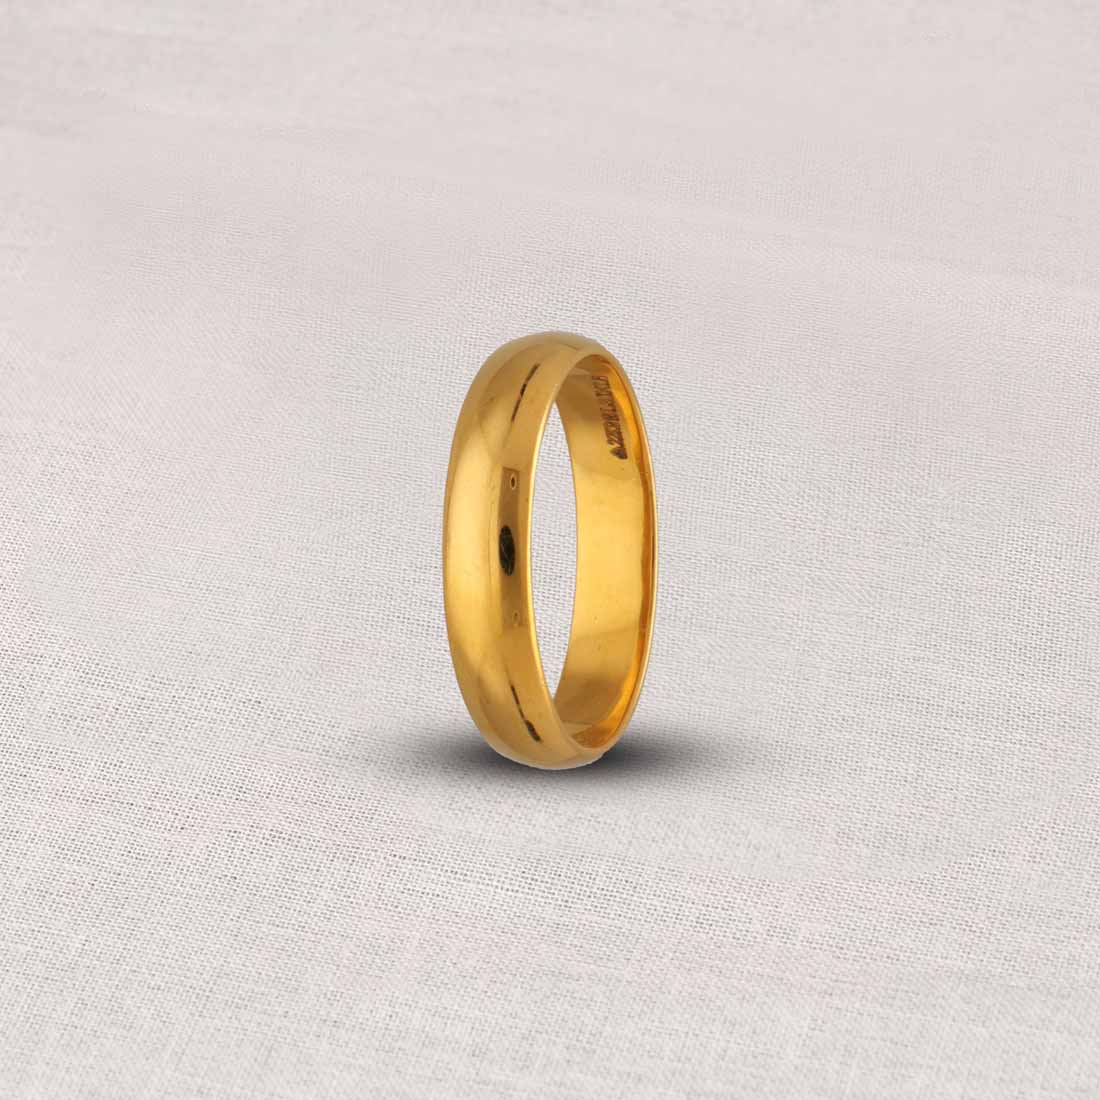 14k Solid Yellow Gold 8mm Wedding Band Ring Size 5 to 14.5 | eBay